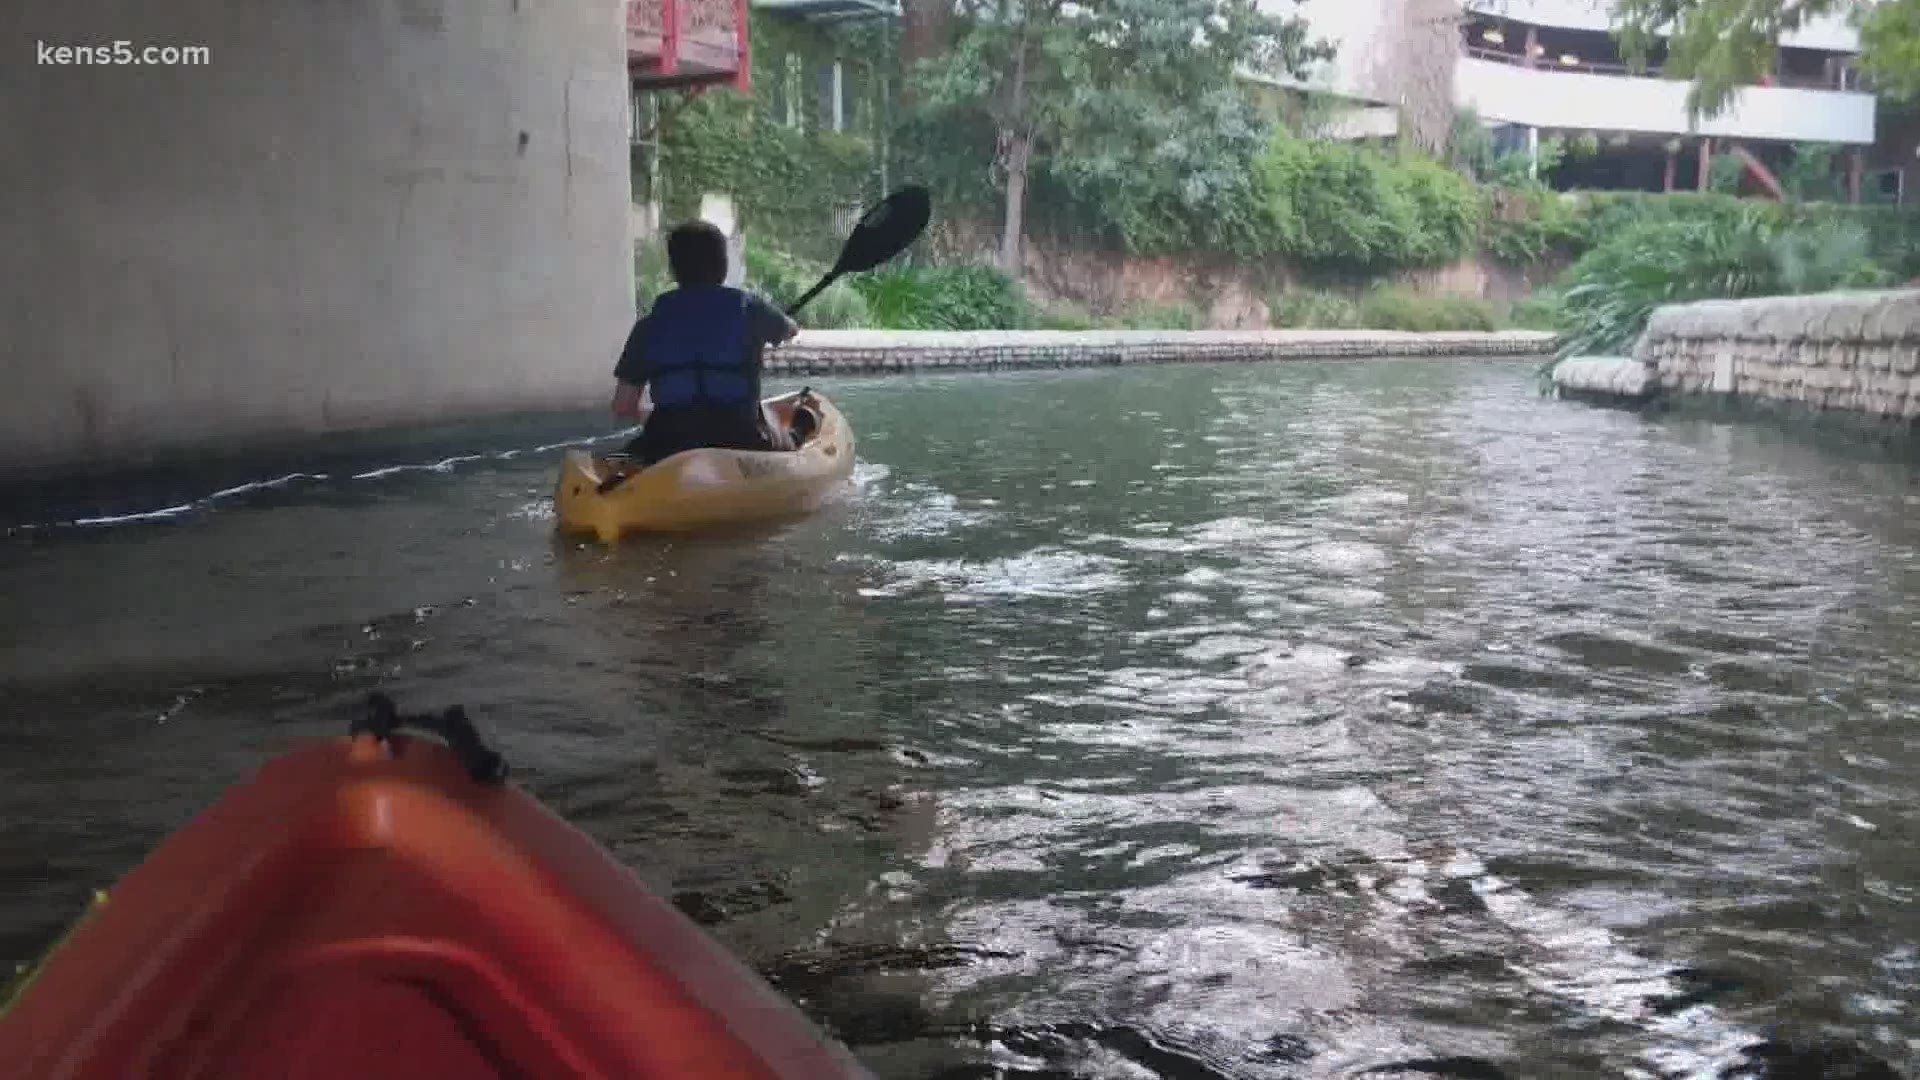 If you aren't one of the 1,800 people who already kayaked down the River Walk, the city is giving you another chance.